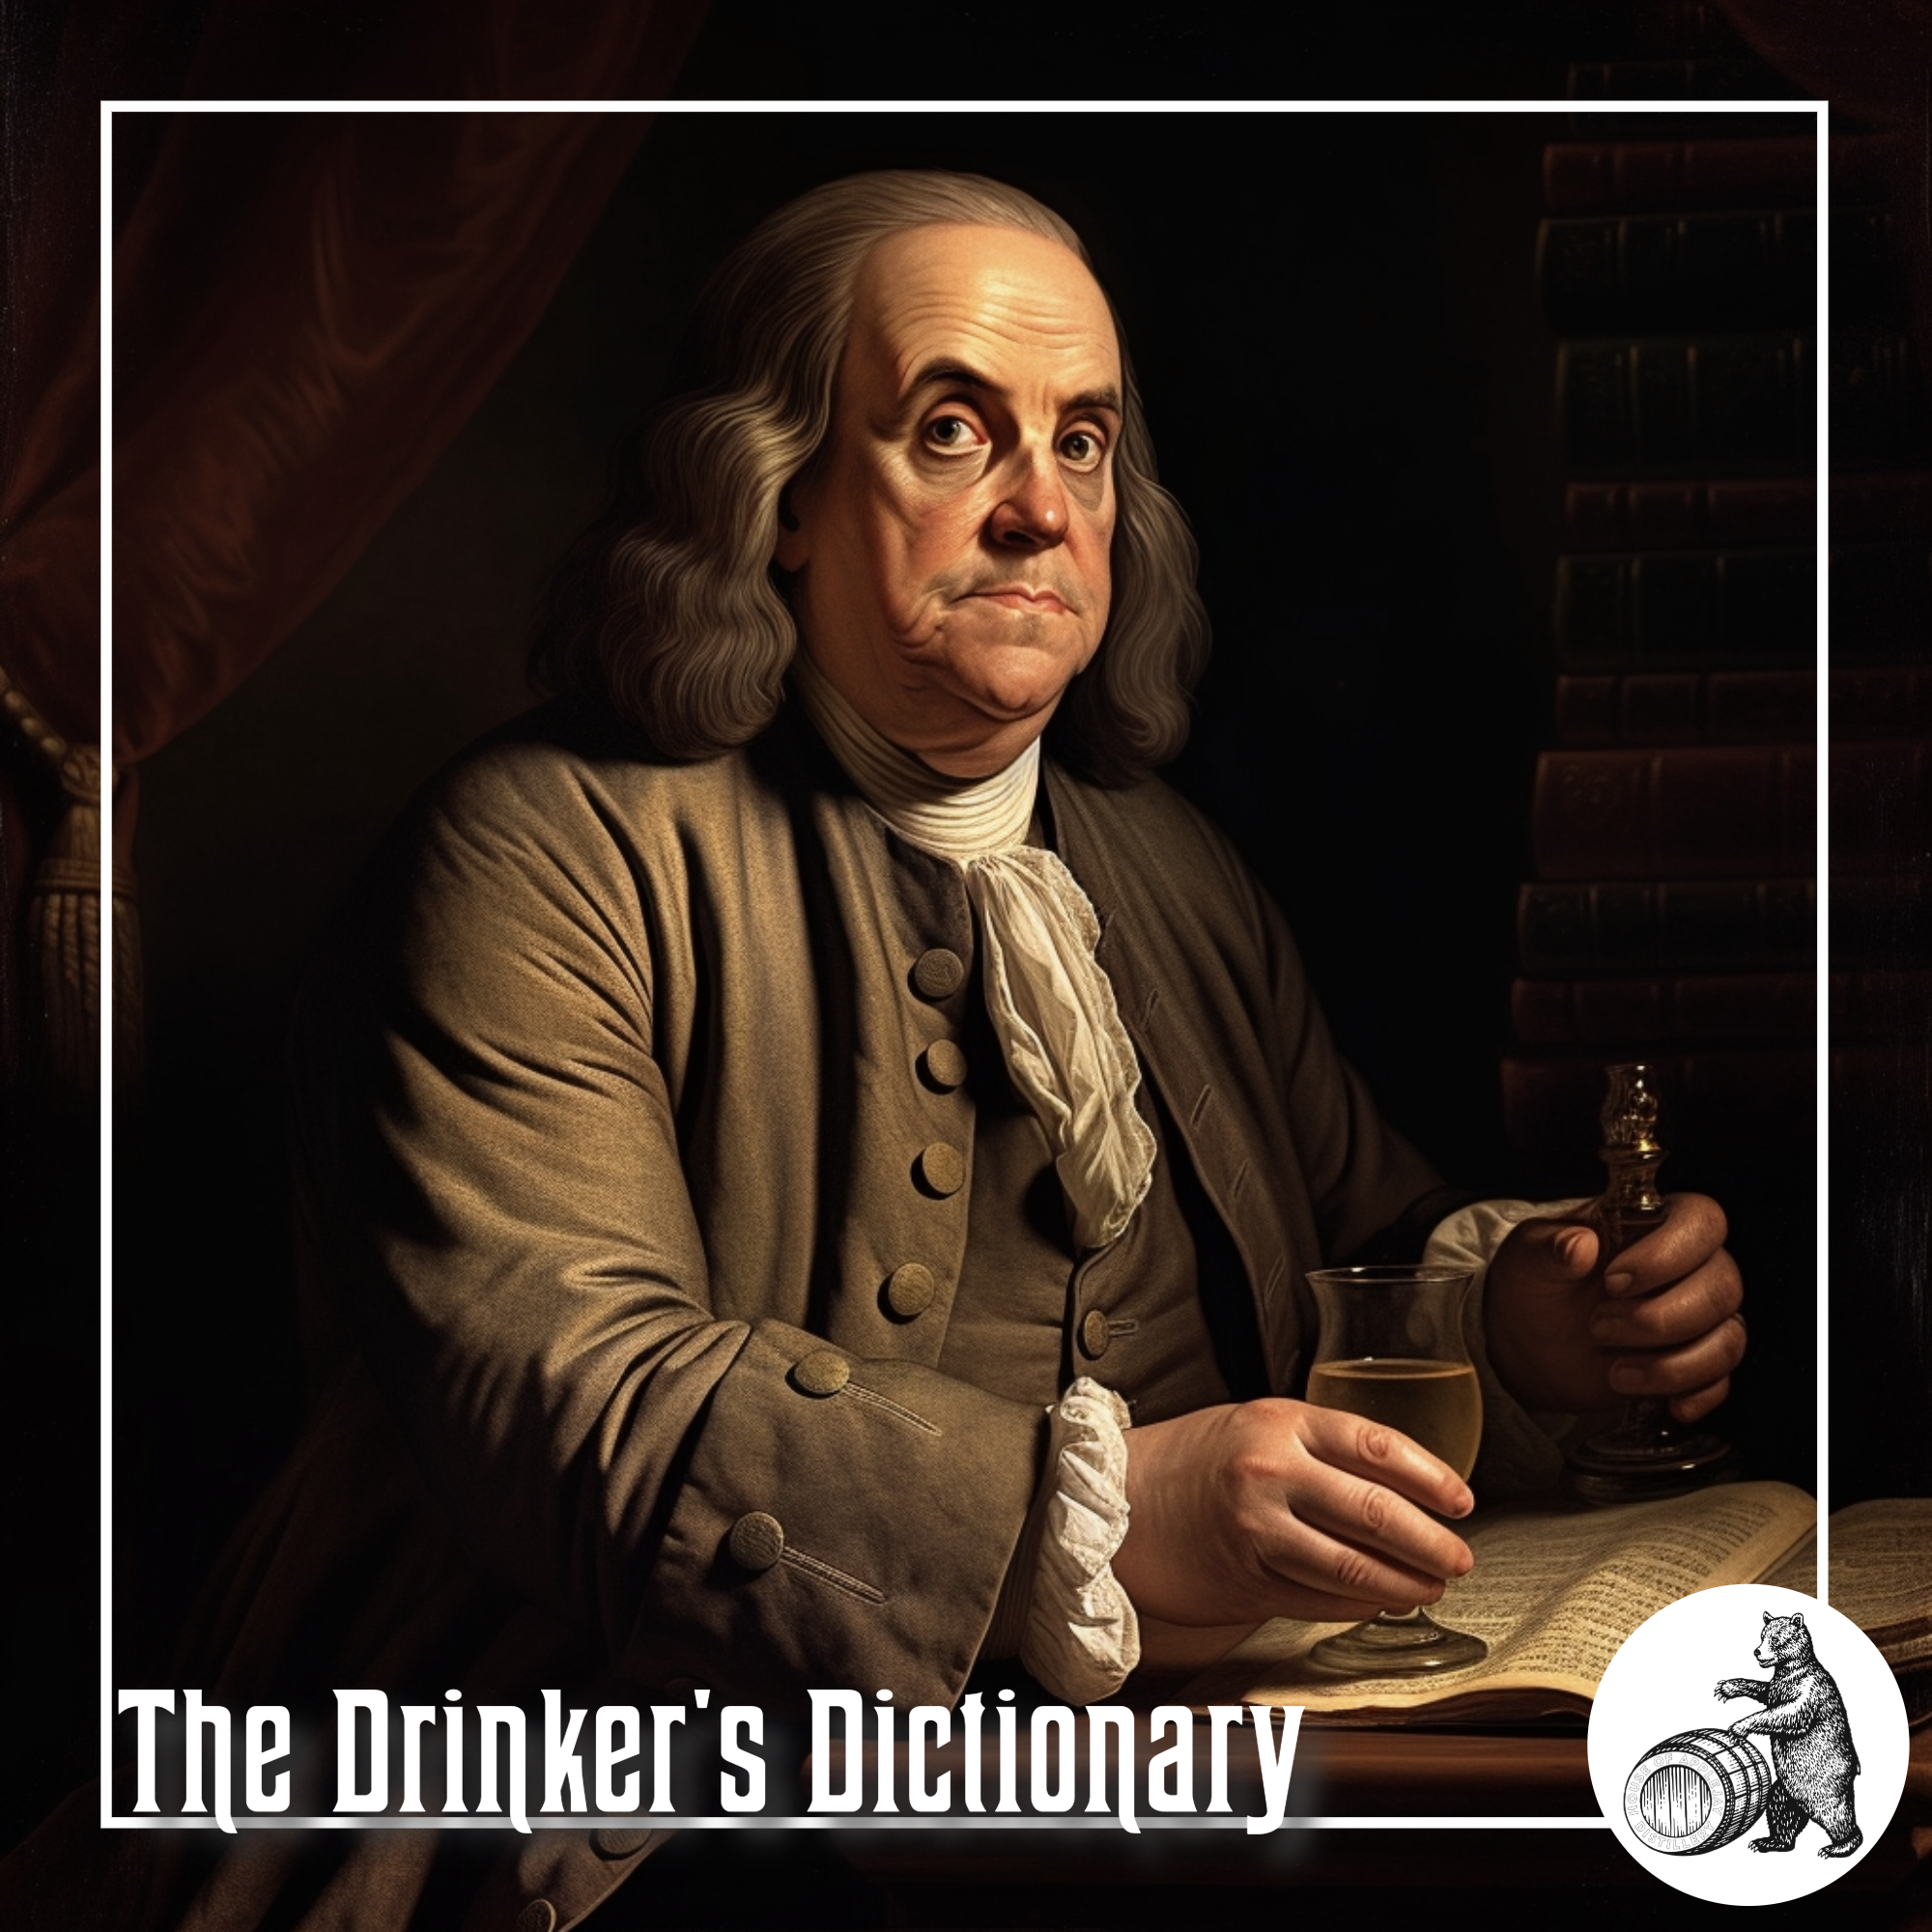 The Drinker's Dictionary (c) House Of Applejay, Inc.